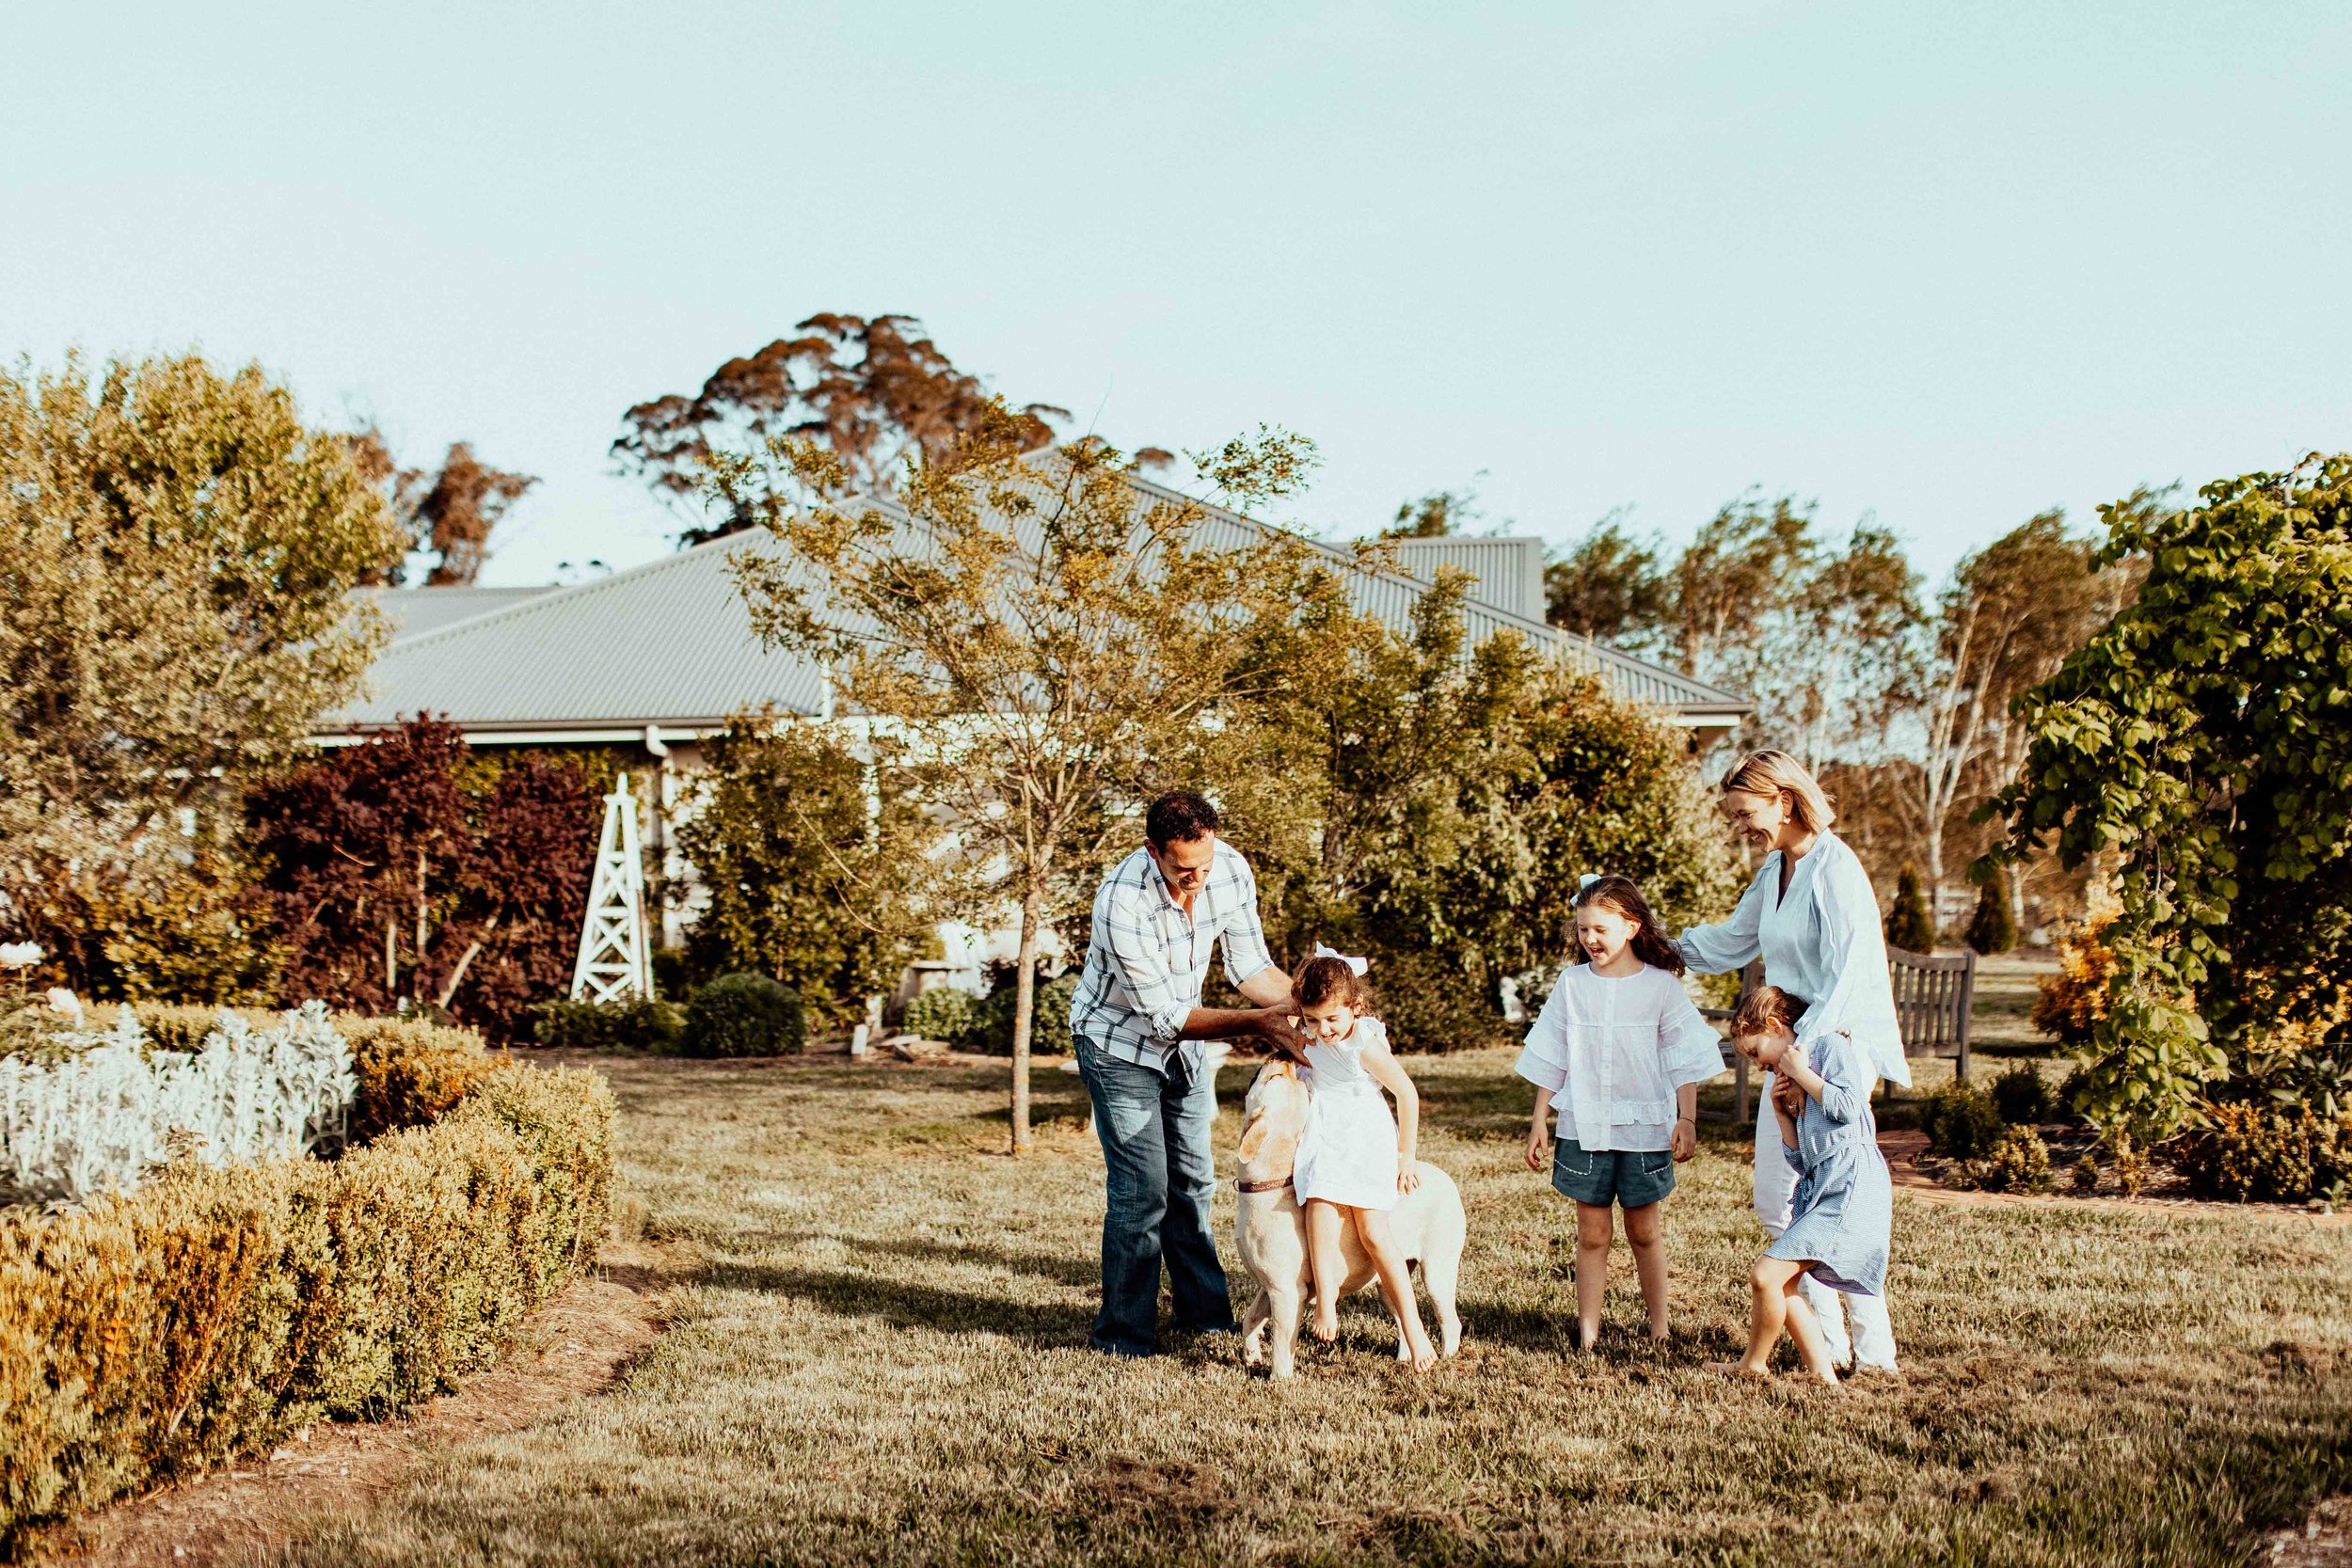 carroll-family-exeter-southern-hoghlands-inhome-family-lifestyle-wollondilly-camden-macarthur-sydney-photography-www.emilyobrienphotography.net-51.jpg